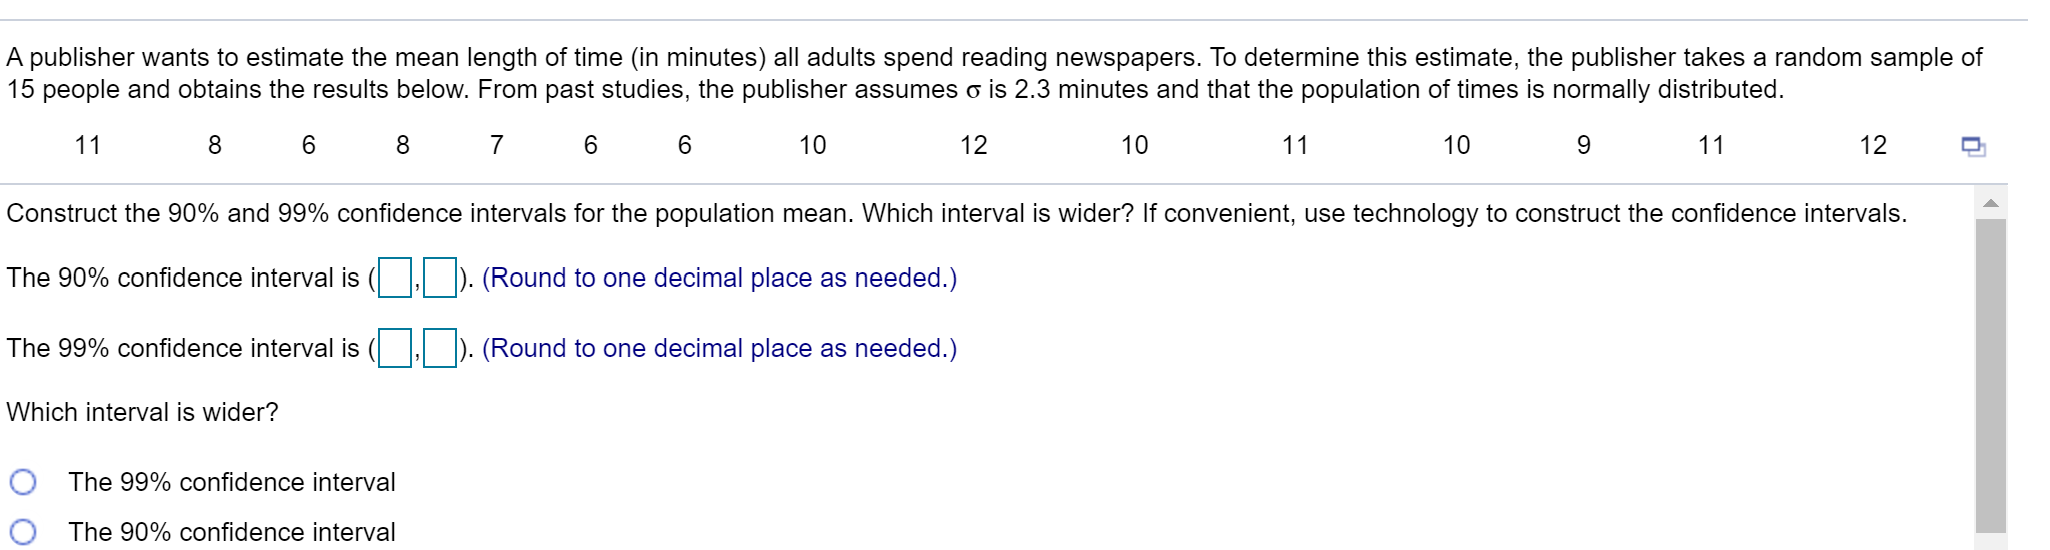 A publisher wants to estimate the mean length of time (in minutes) all adults spend reading newspapers. To determine this estimate, the publisher takes a random sample o
15 people and obtains the results below. From past studies, the publisher assumes o is 2.3 minutes and that the population of times is normally distributed.
11
6.
7 6 6
10
12
10
11
10
9
11
12
Construct the 90% and 99% confidence intervals for the population mean. Which interval is wider? If convenient, use technology to construct the confidence intervals.
The 90% confidence interval is
| ). (Round to one decimal place as needed.)
The 99% confidence interval is
| ). (Round to one decimal place as needed.)
Which interval is wider?
O The 99% confidence interval
The 90% confidence interval
